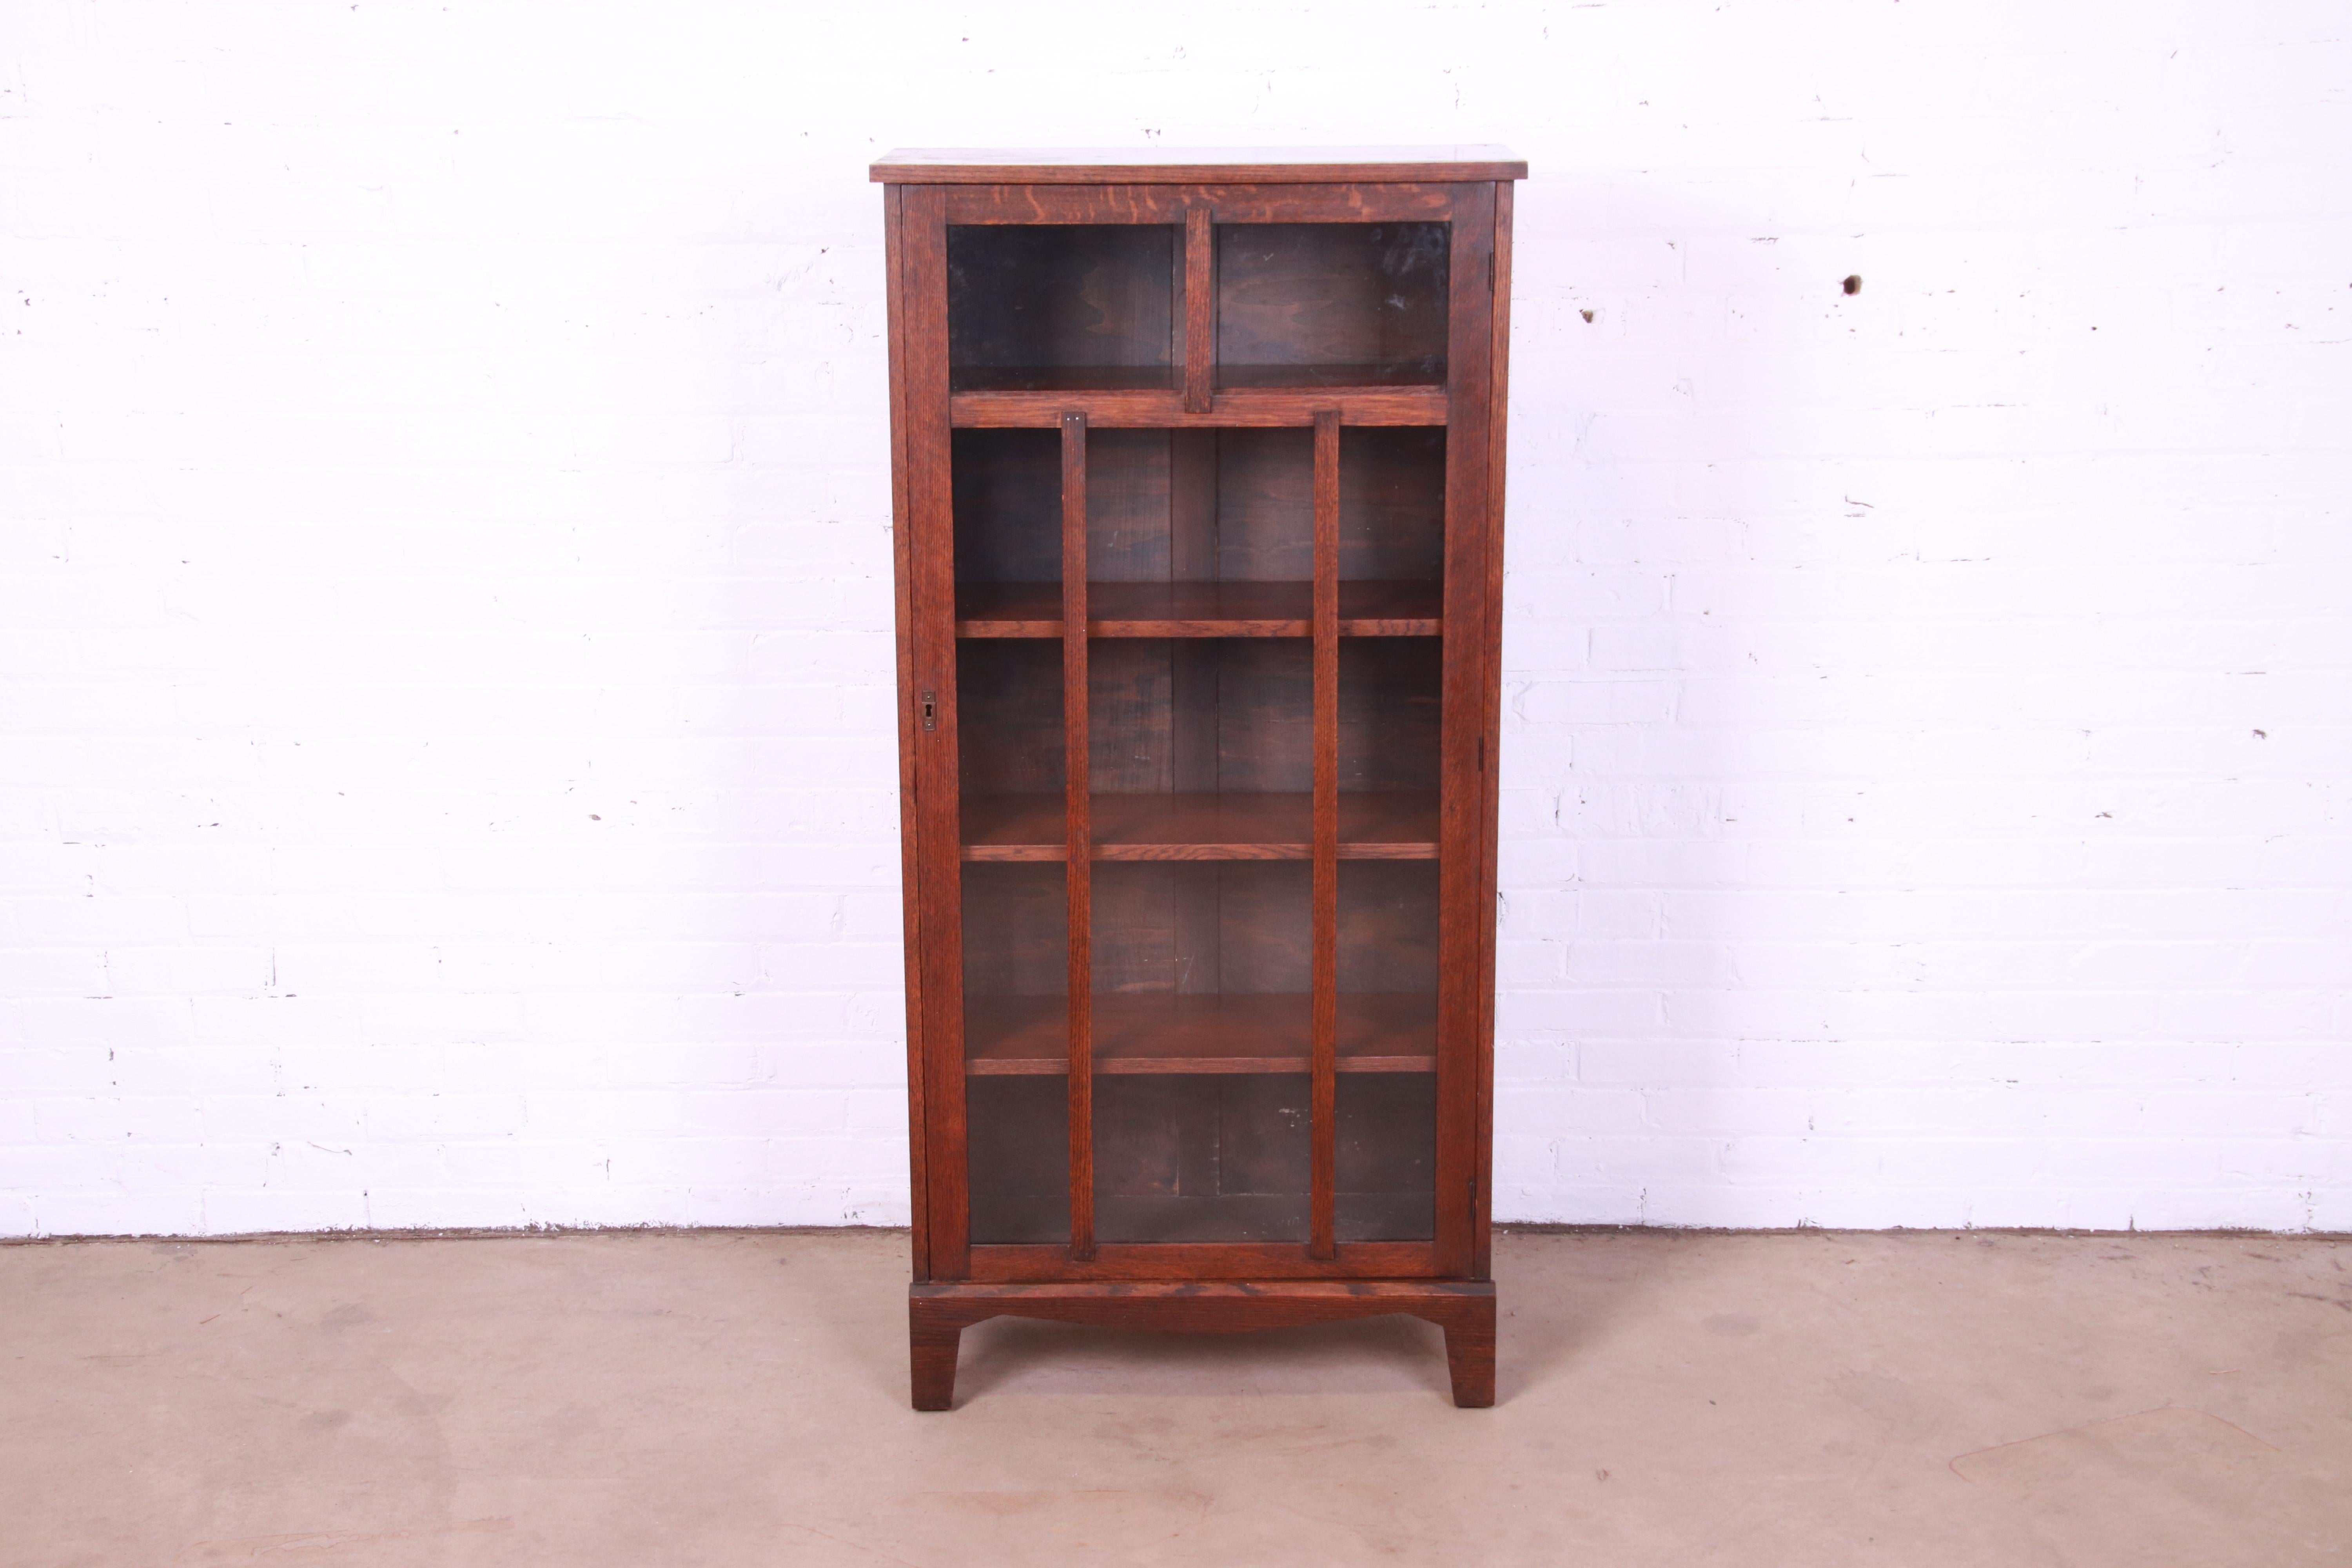 A beautiful antique Arts & Crafts glass front bookcase cabinet

In the manner of Stickley

USA, Circa 1900

Solid oak, with mullioned glass front door.

Measures: 27.5